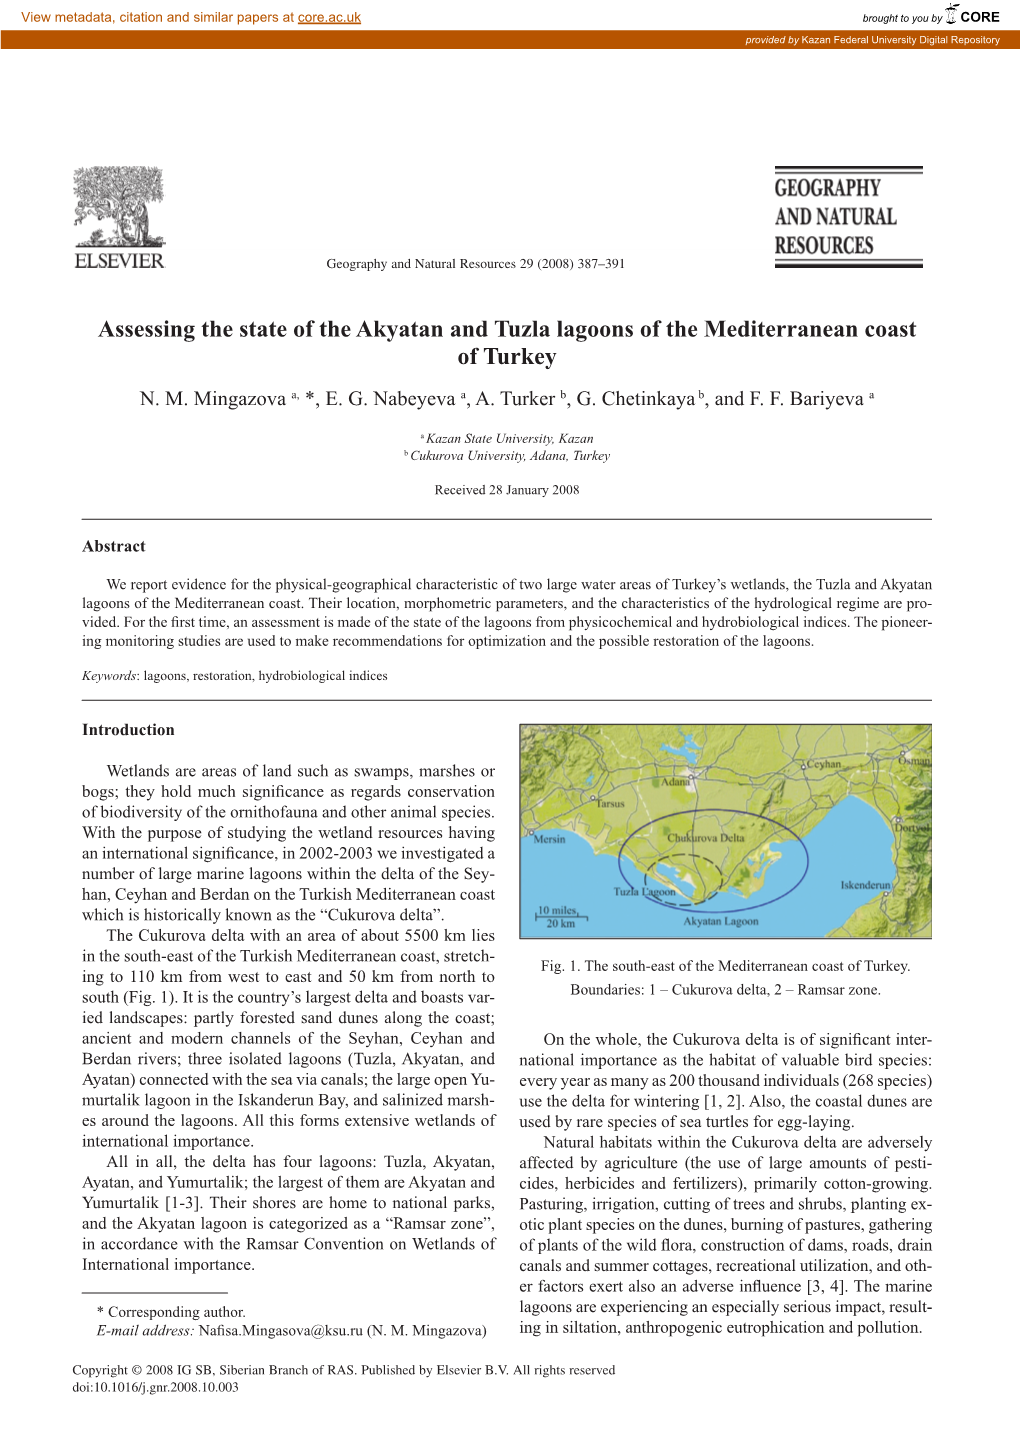 Assessing the State of the Akyatan and Tuzla Lagoons of the Mediterranean Coast of Turkey N